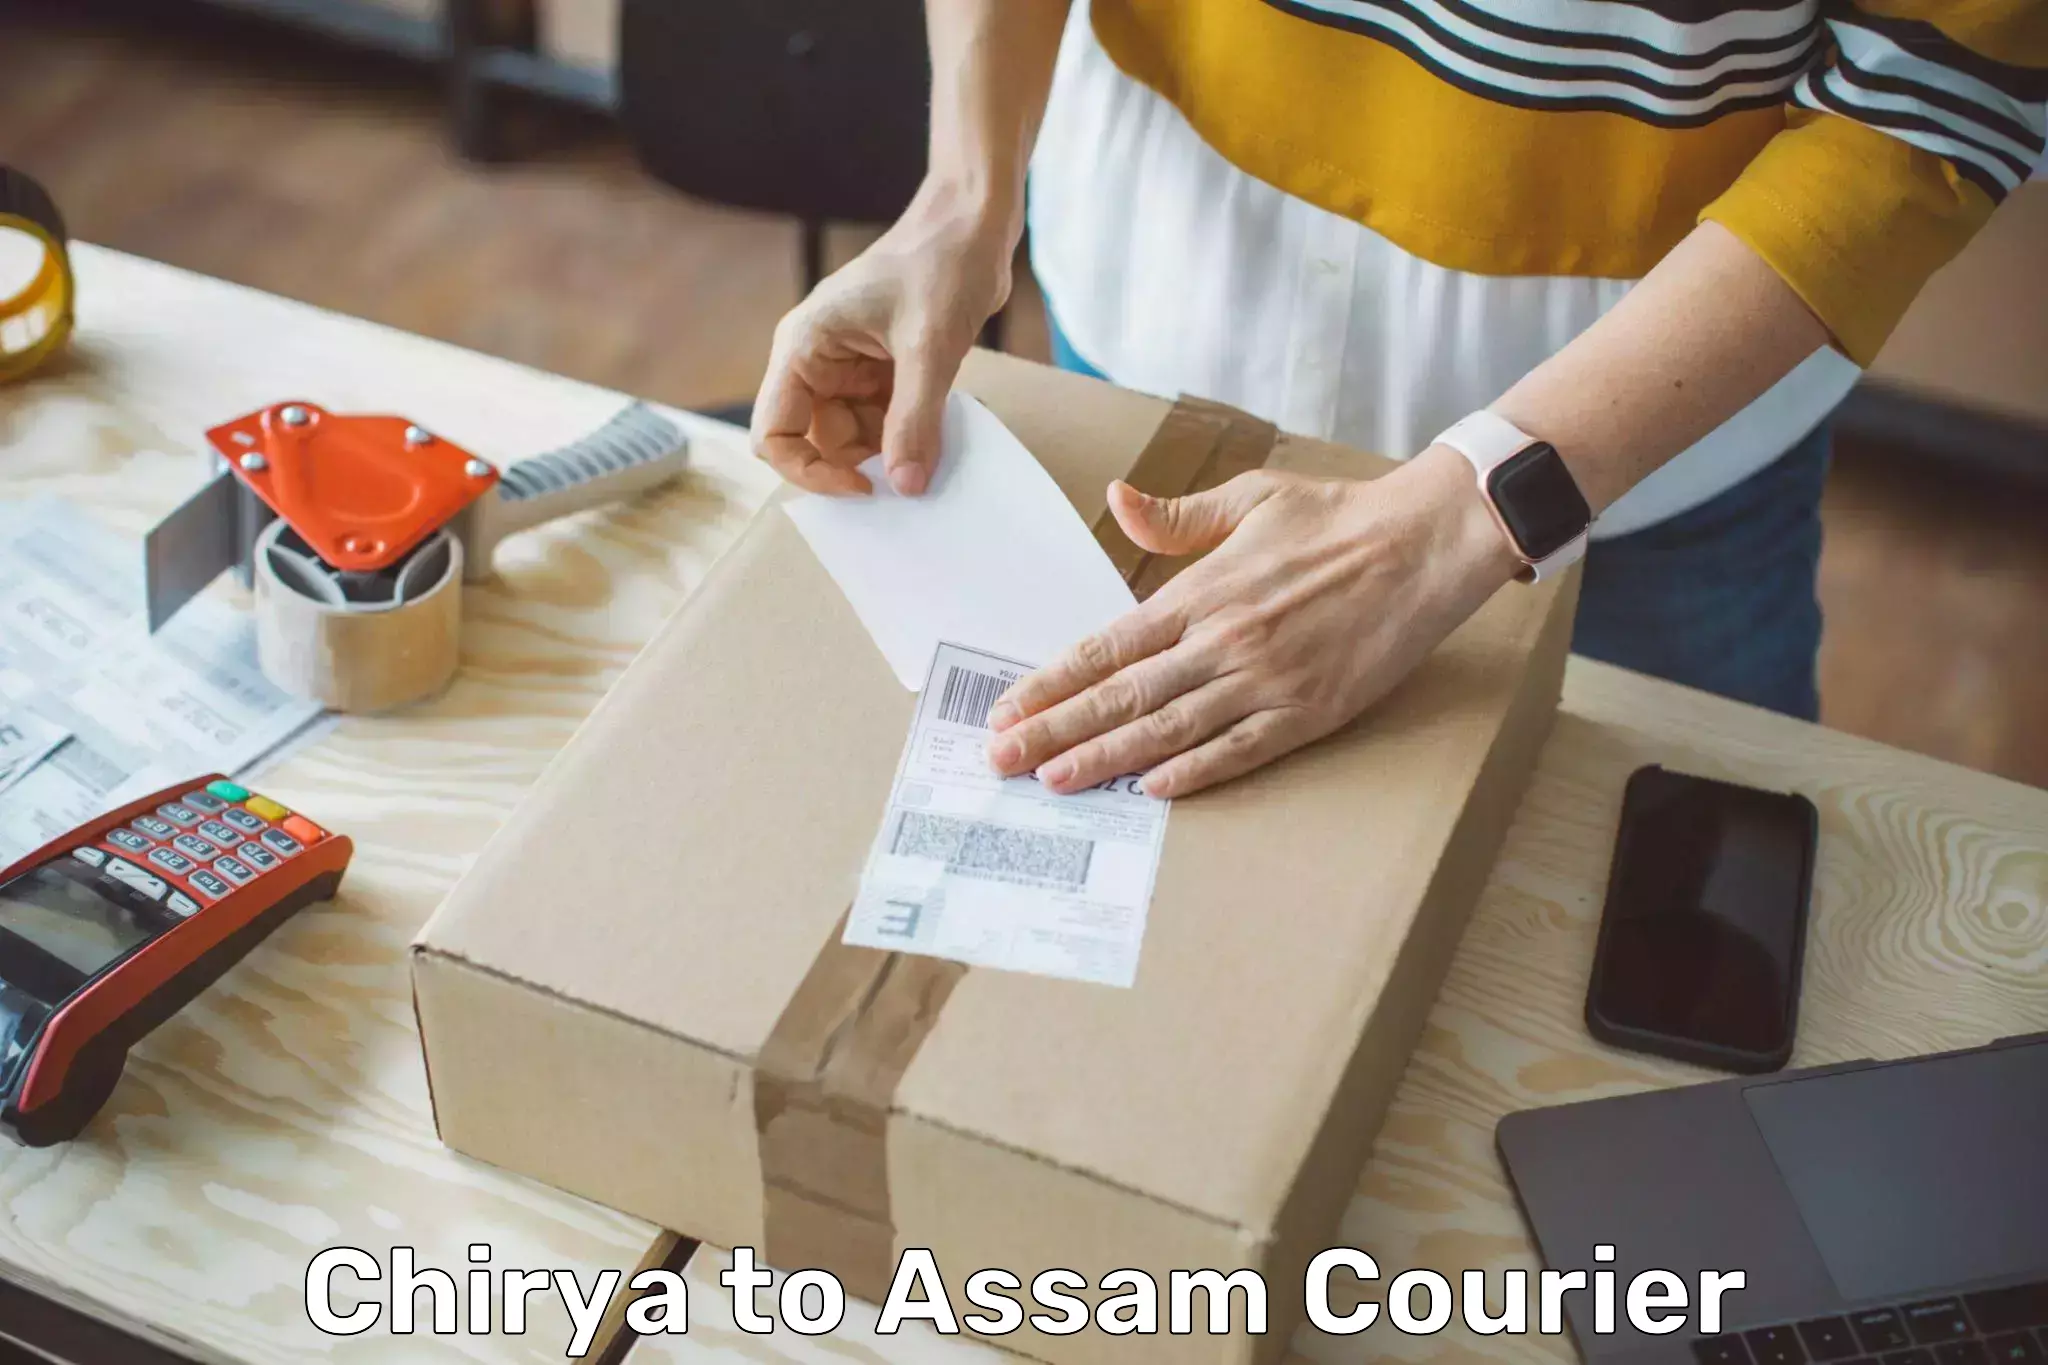 Reliable delivery network Chirya to Assam